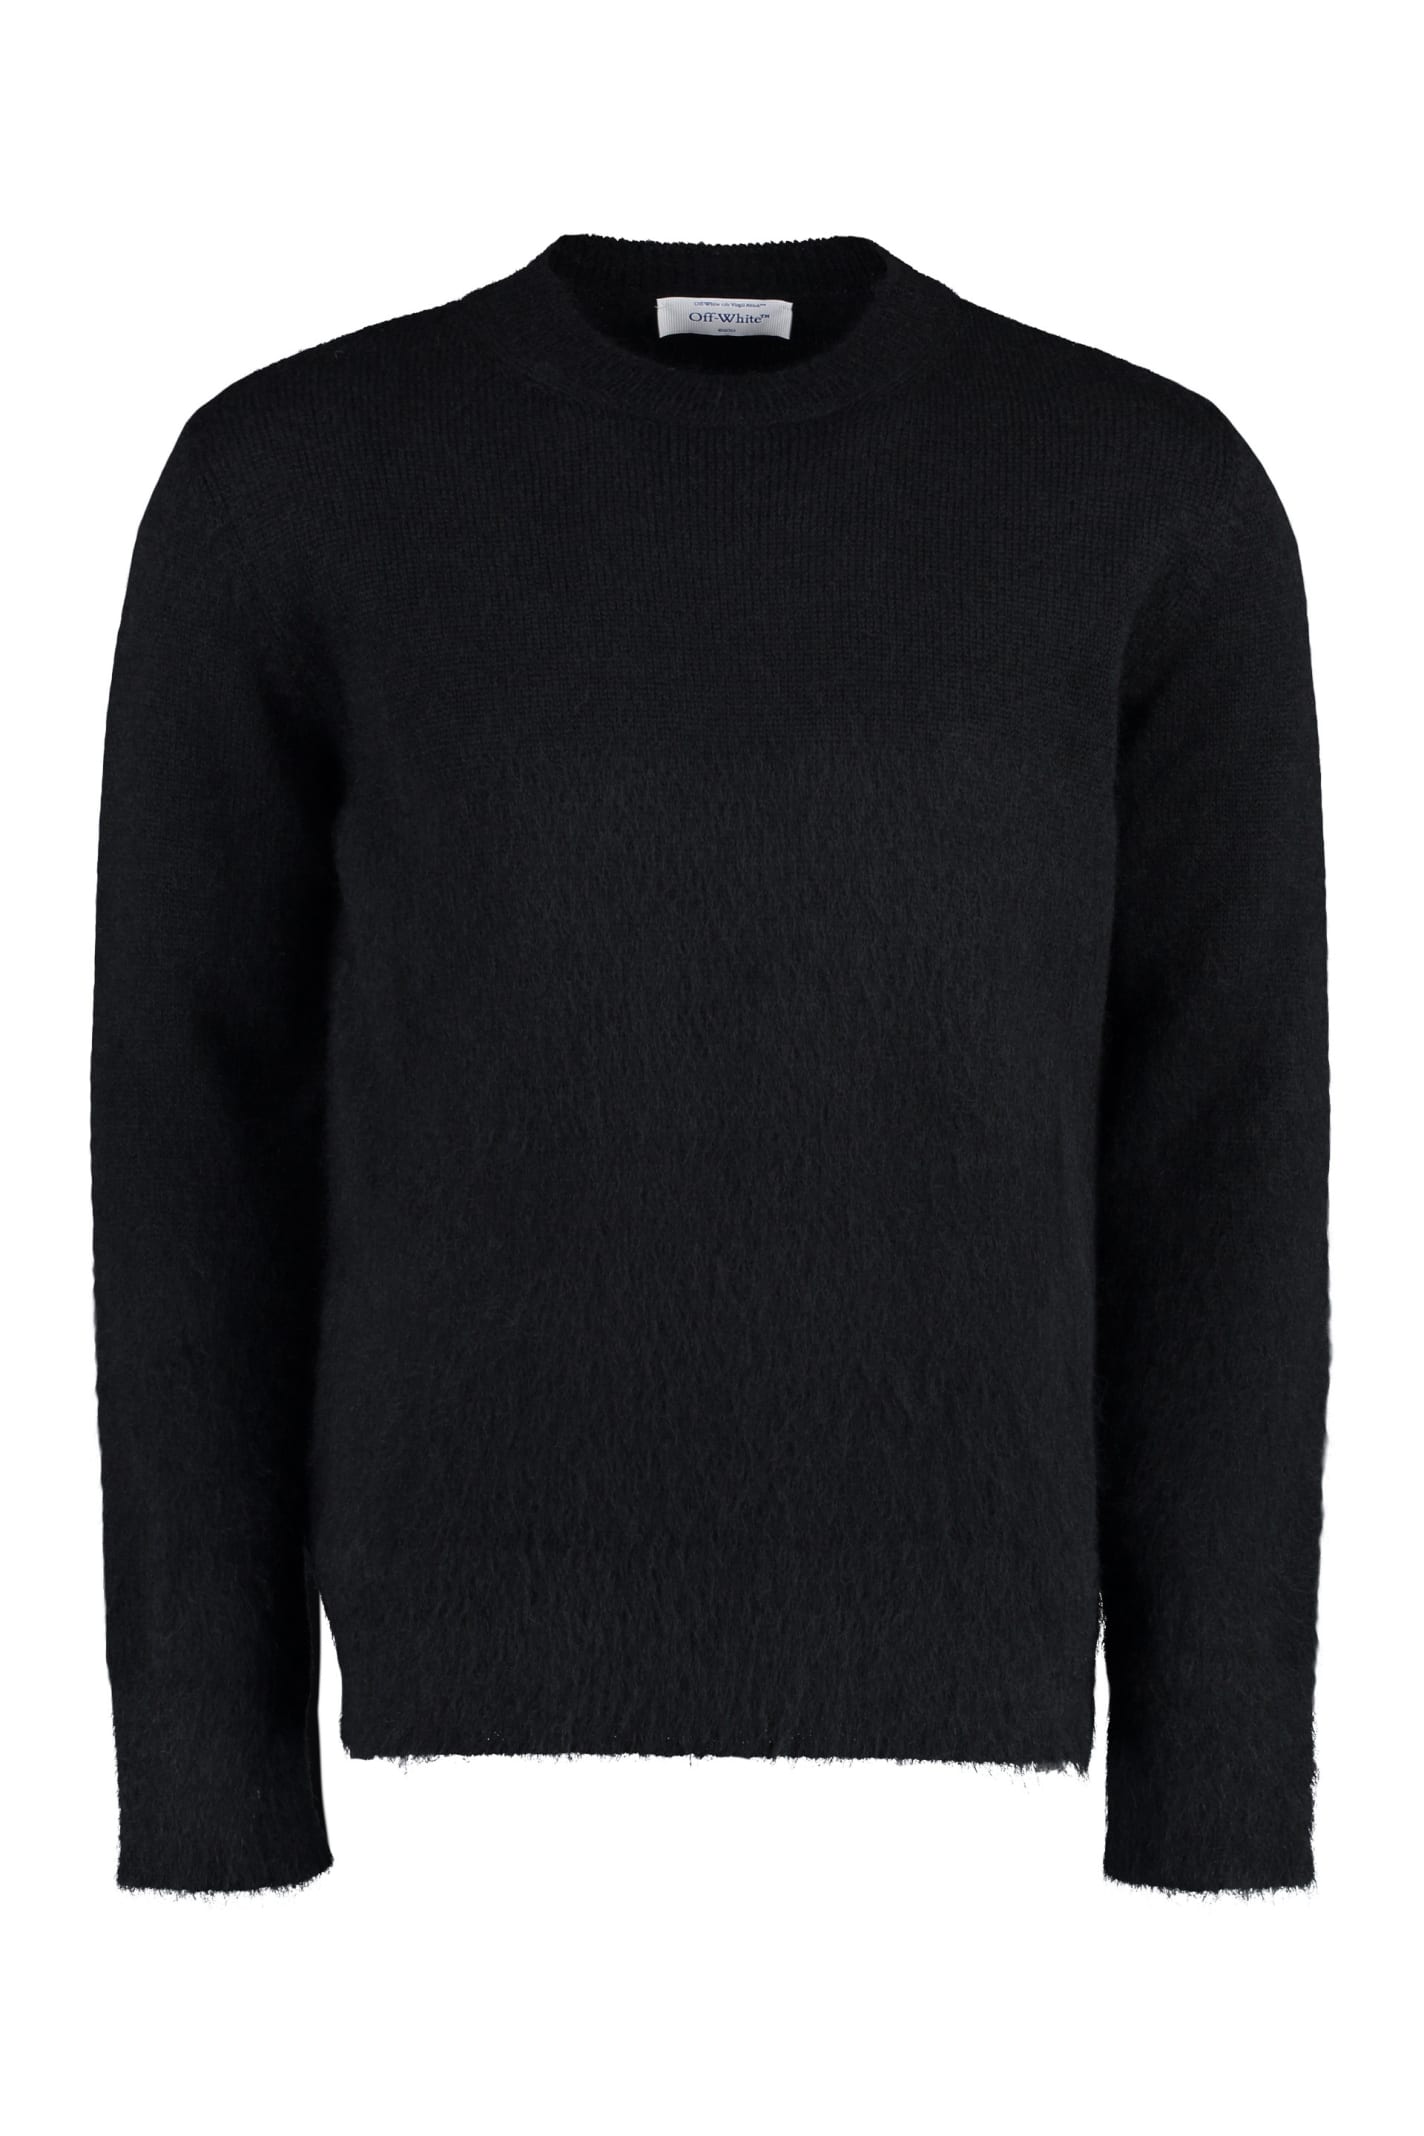 Off-white Mohair Blend Sweater In Black Beige